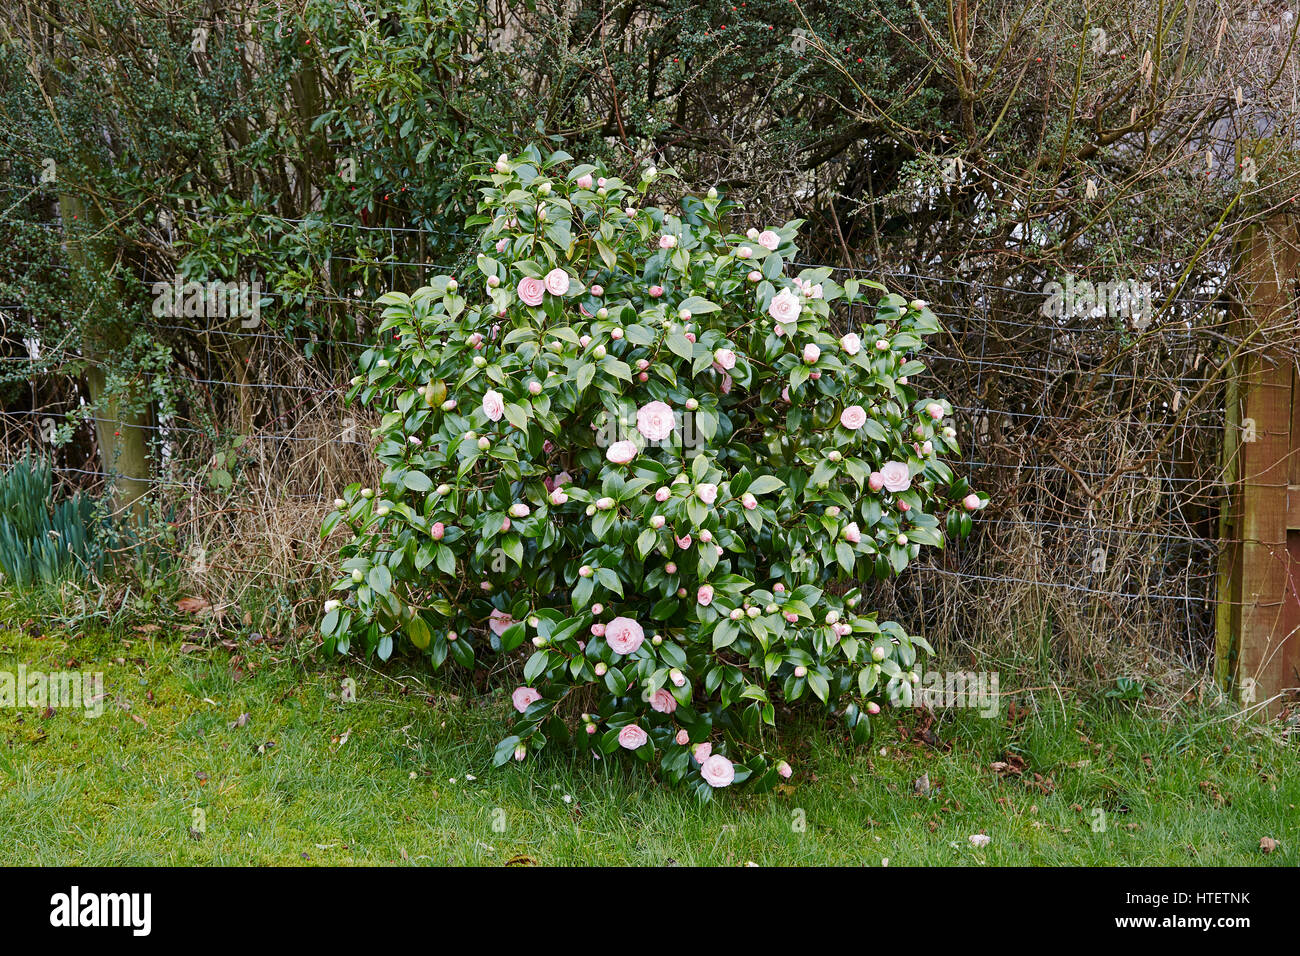 A Pink  Camellia japonica bush showing double pink flowers in a garden setting Stock Photo